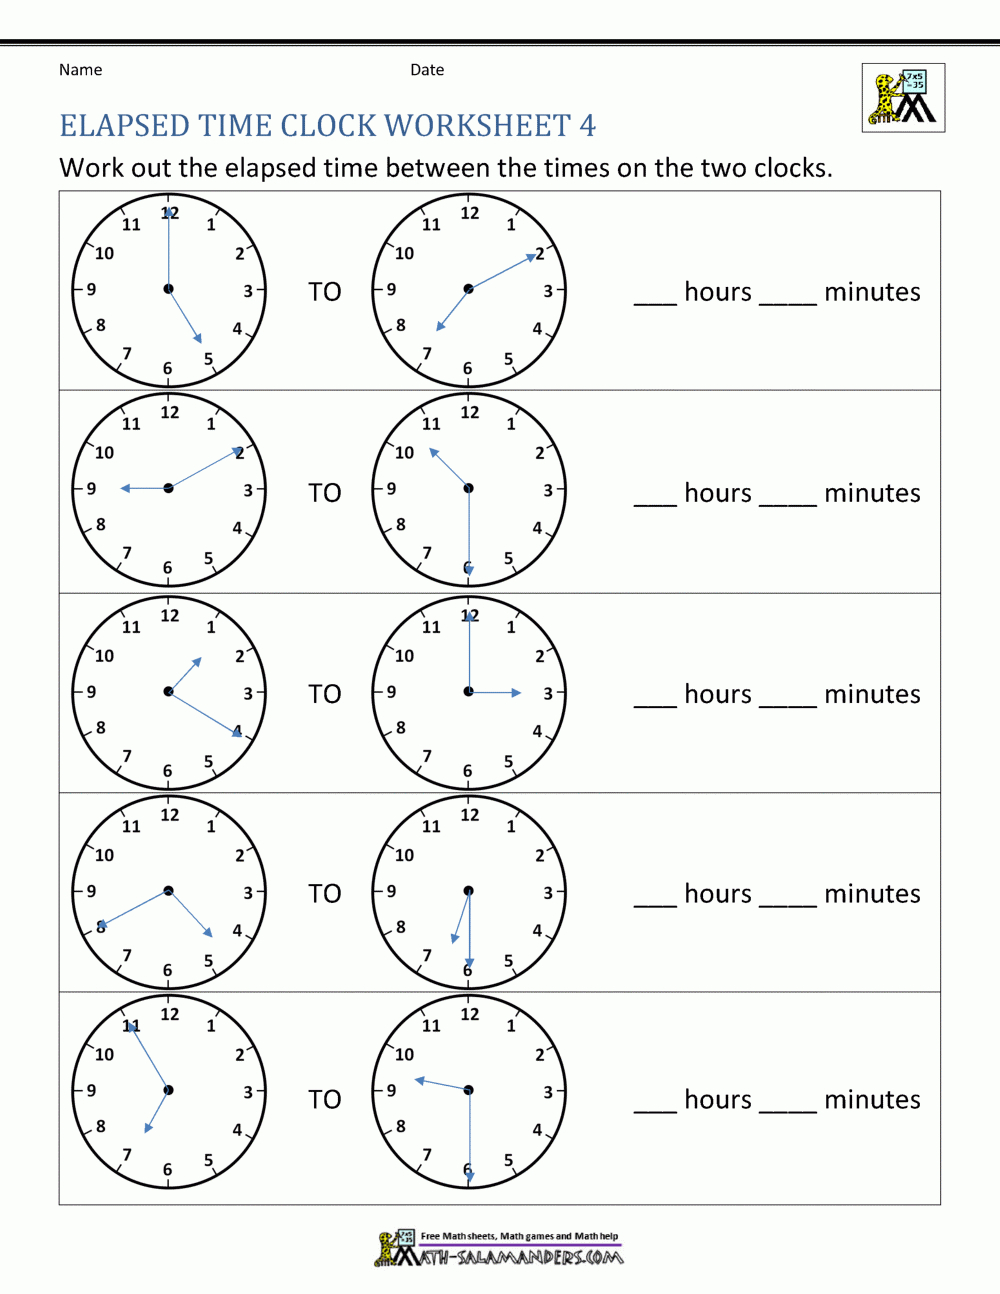 Elapsed Time Worksheets for Elapsed Time Worksheets Free Printable